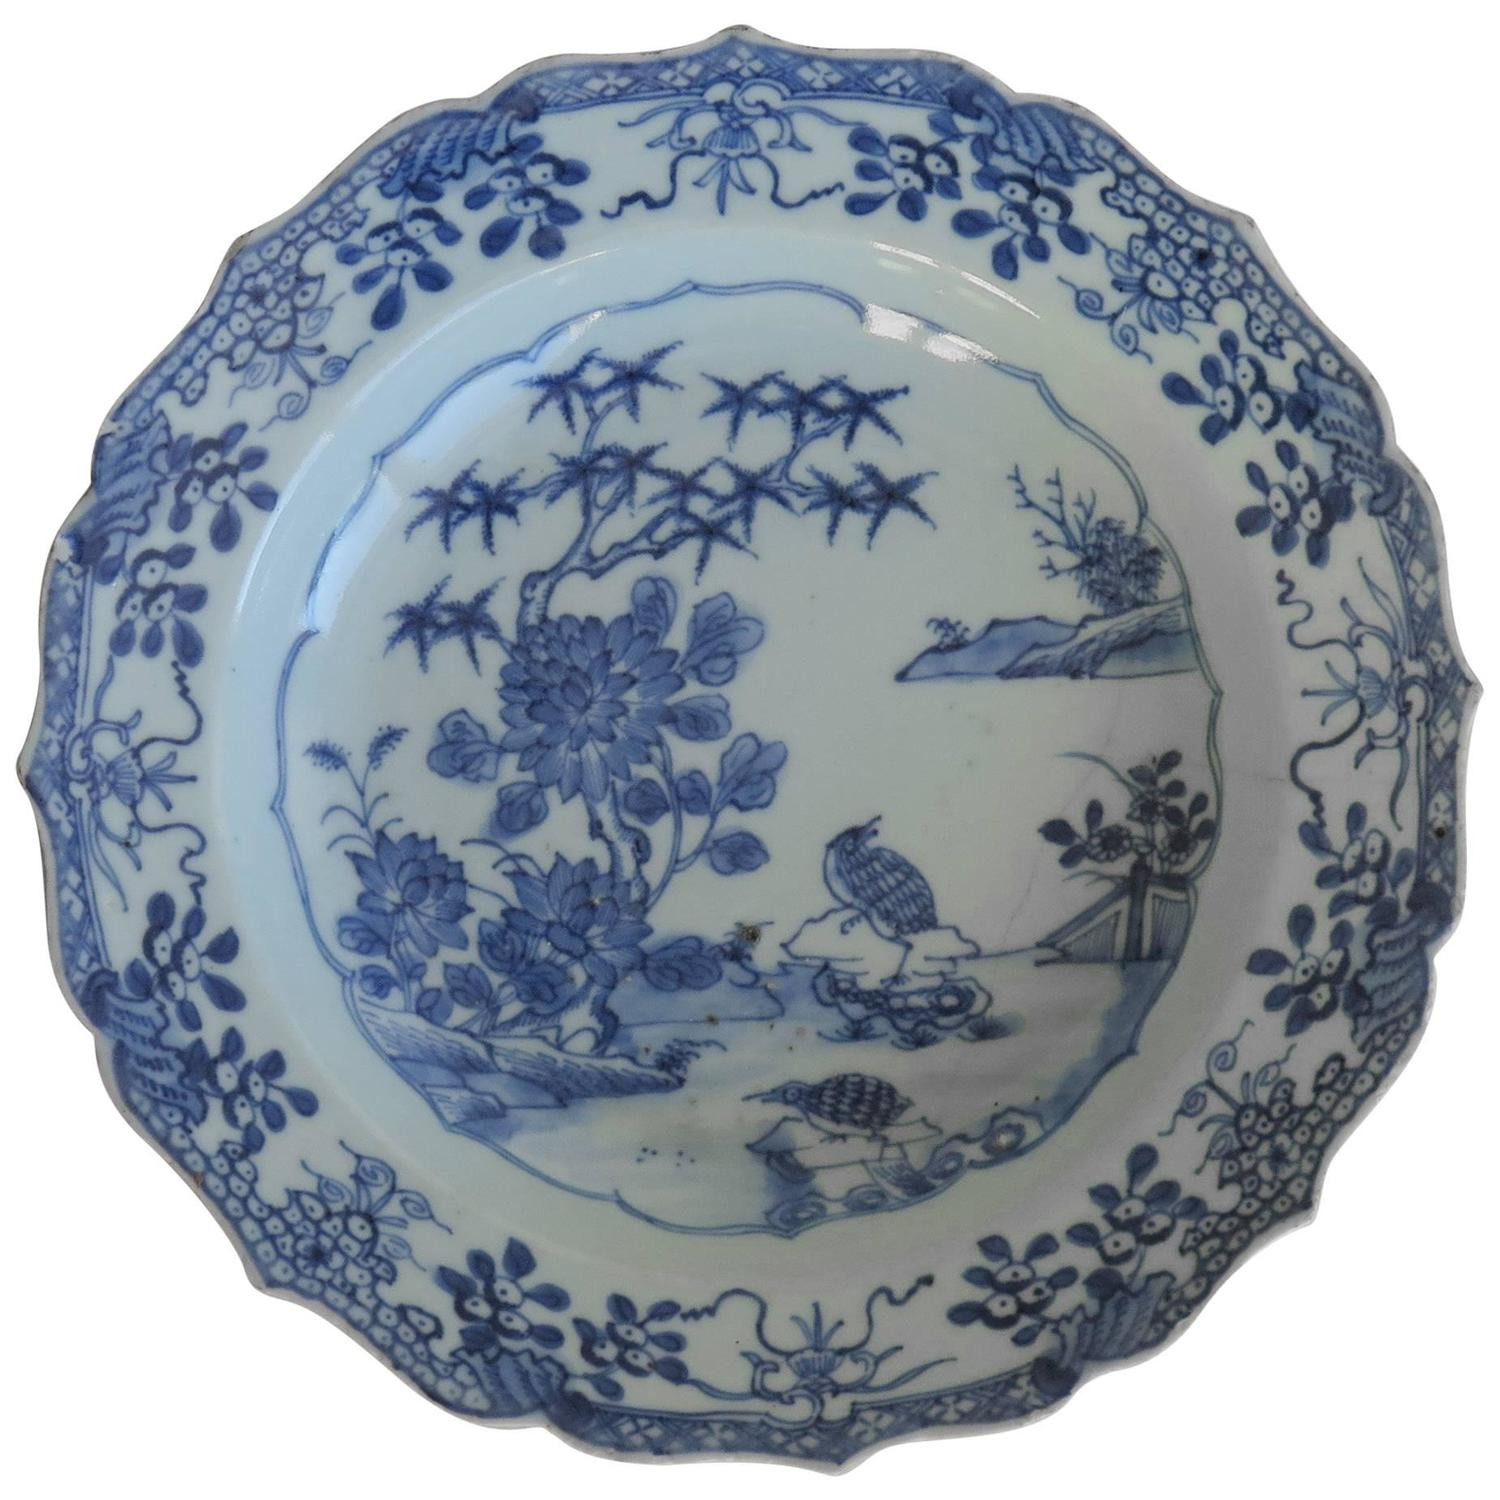 24 Trendy Antique Chinese Porcelain Vases 2024 free download antique chinese porcelain vases of chinese porcelain plate or bowl blue and white woodland birds with regard to chinese porcelain plate or bowl blue and white woodland birds circa 1770 at 1s